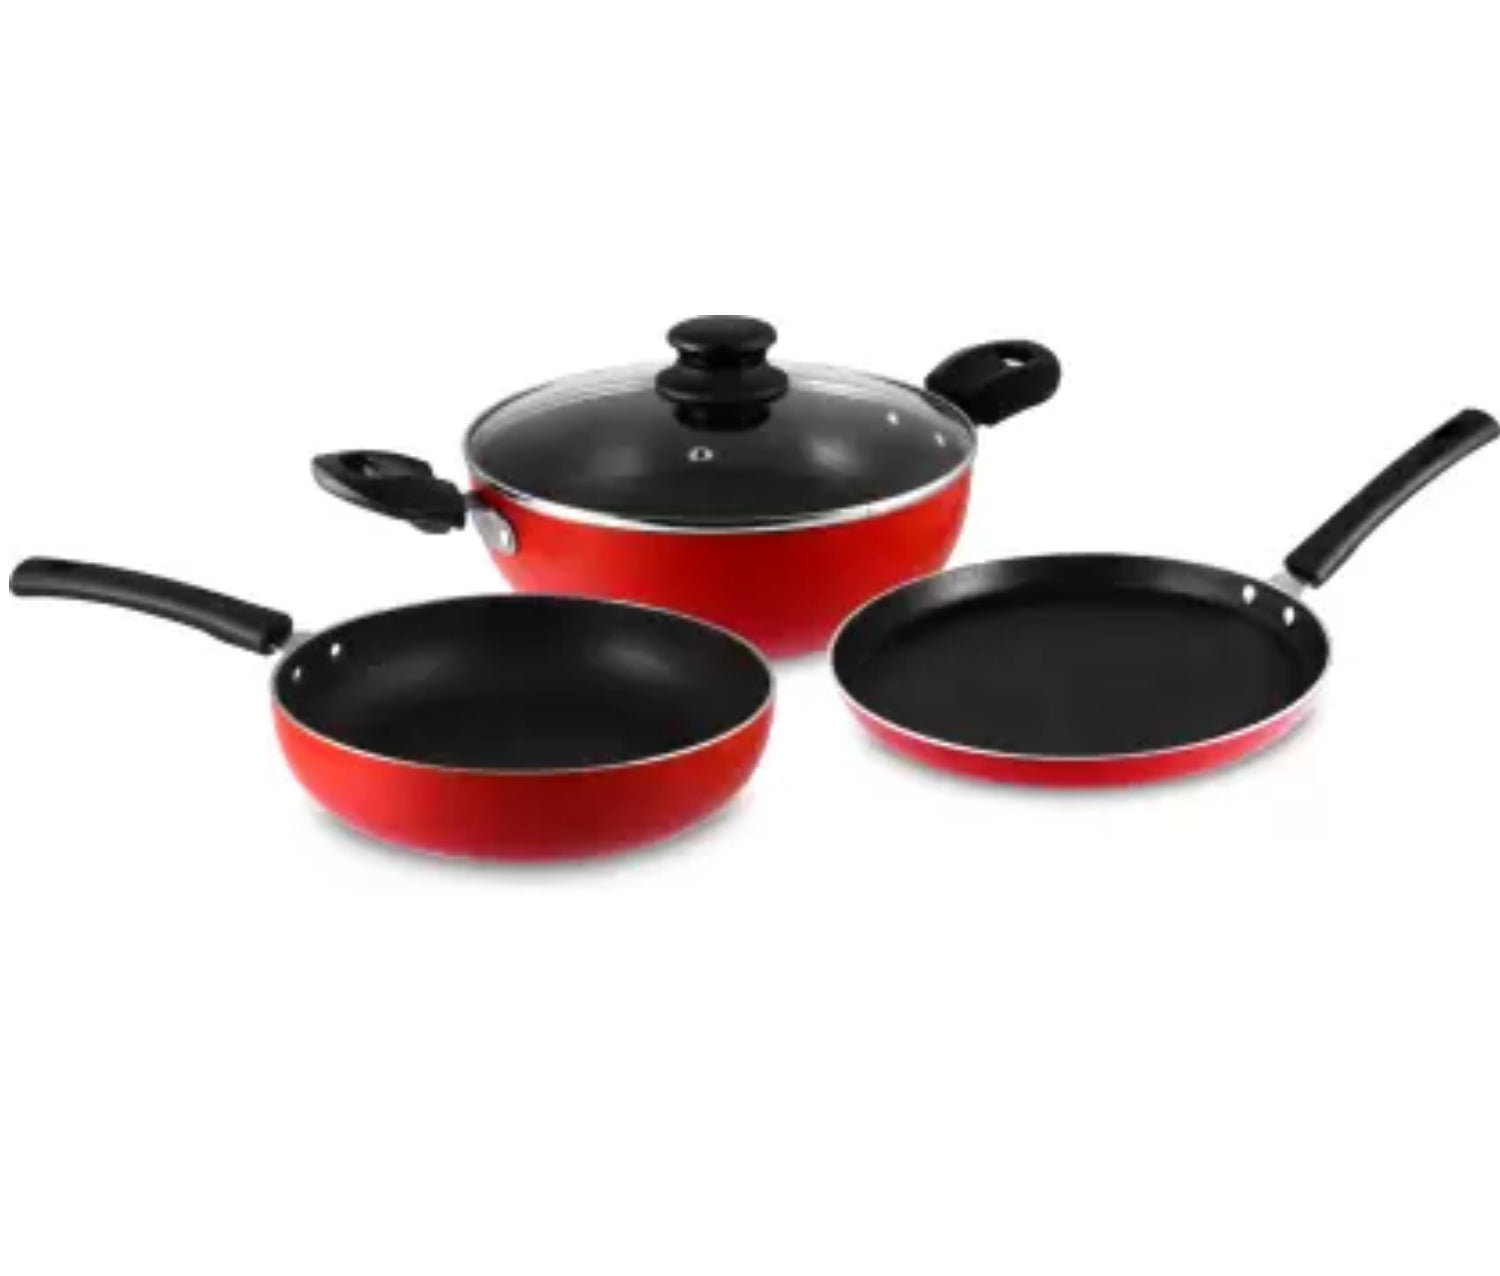 Classic Essentials Allure Non-Stick Cookware Set of 3 Pieces with Glass Lid Induction Bottom Non-Stick Coated Cookware Set  (Aluminium, 3 - Piece)